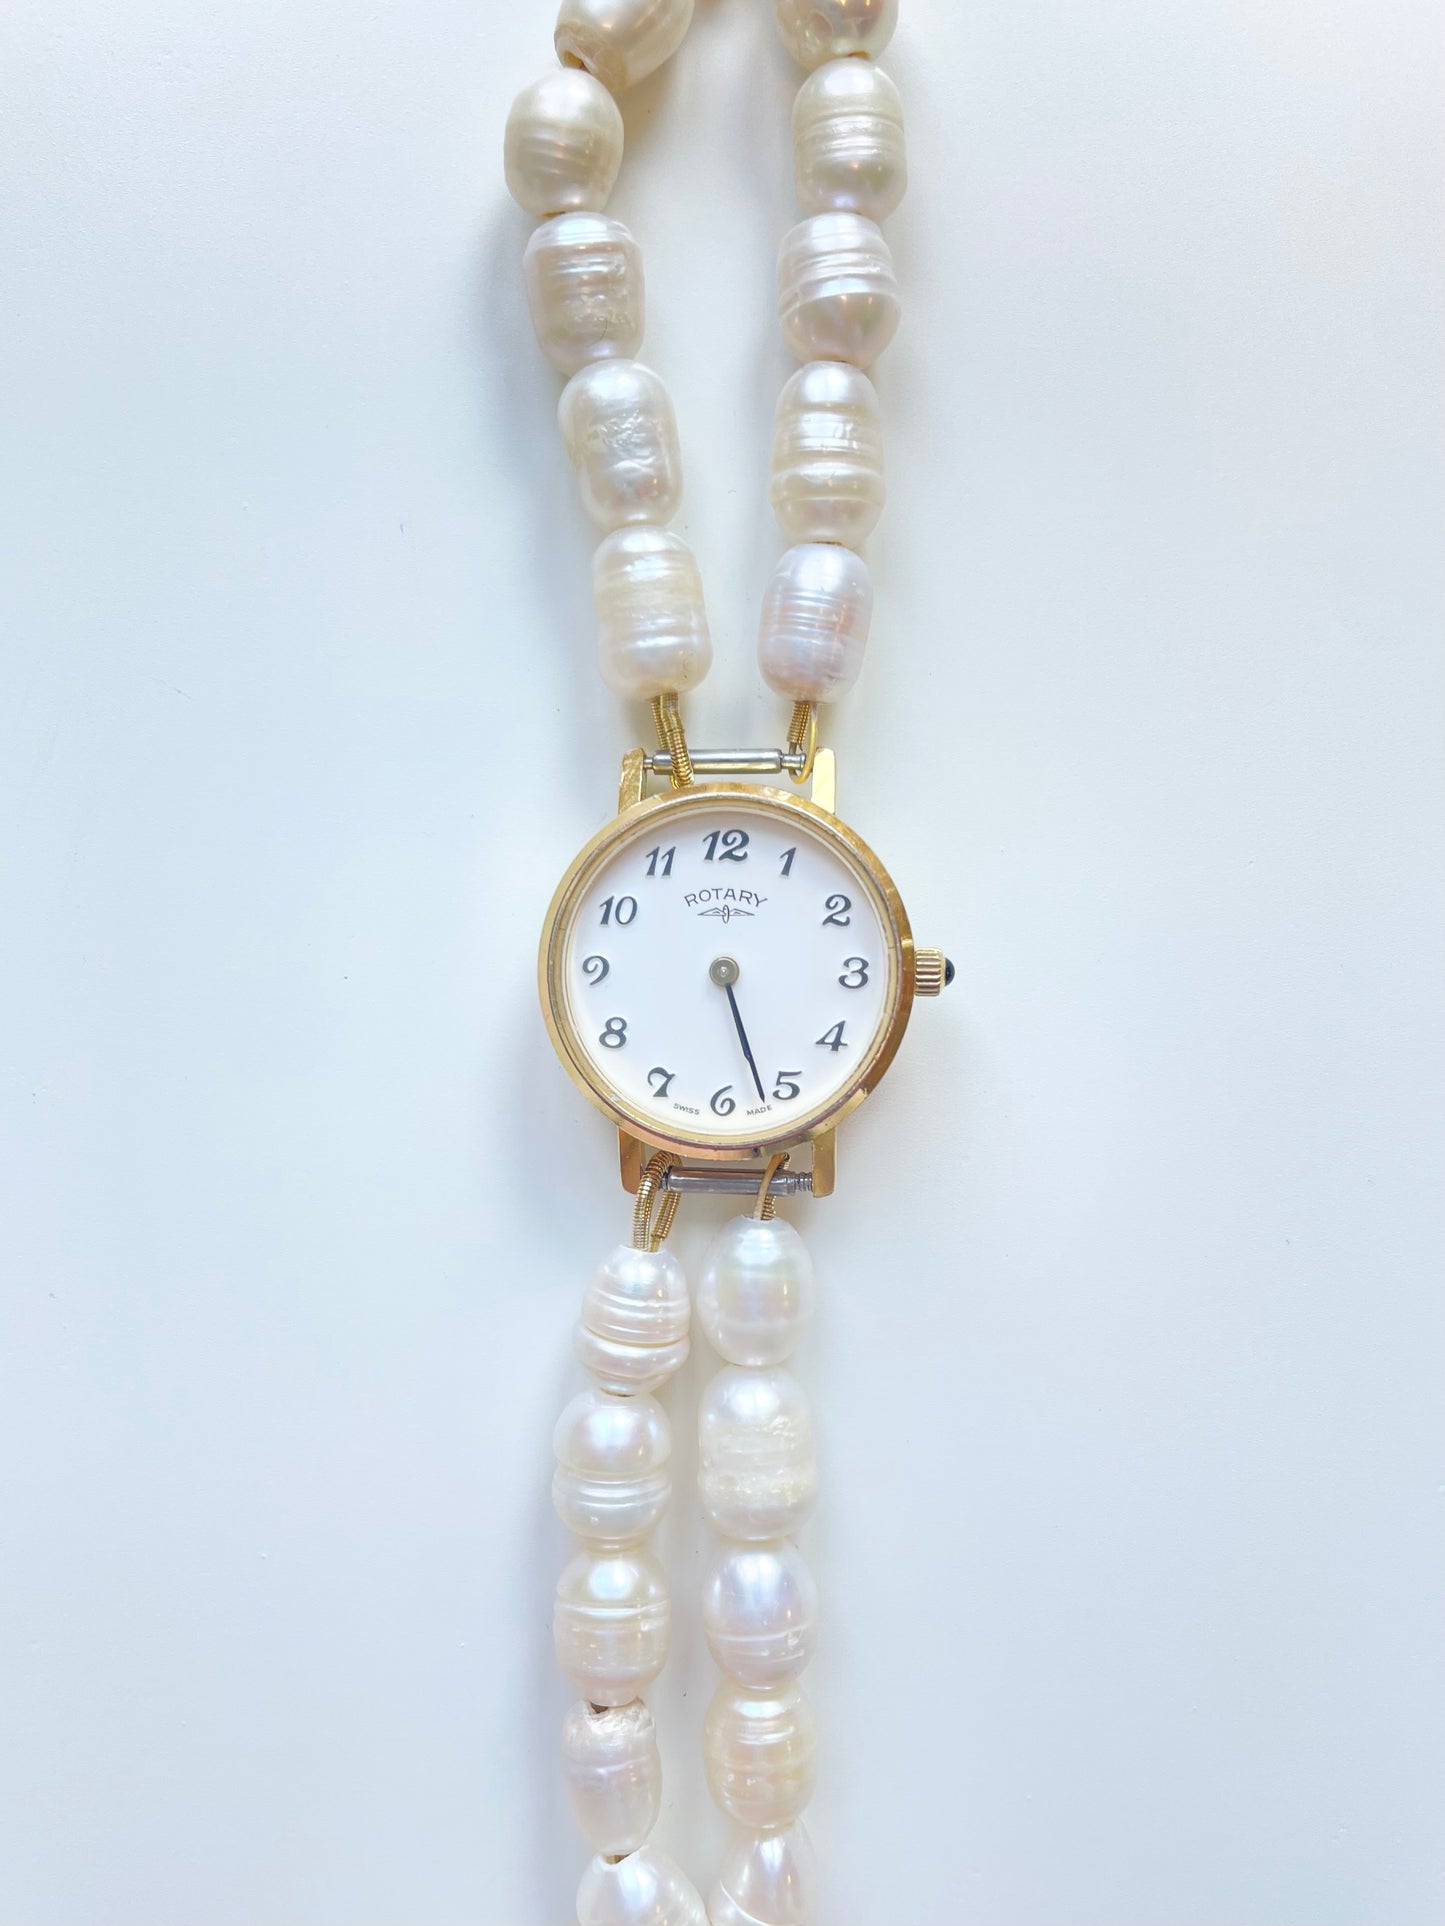 The Freshwater Pearl Watch